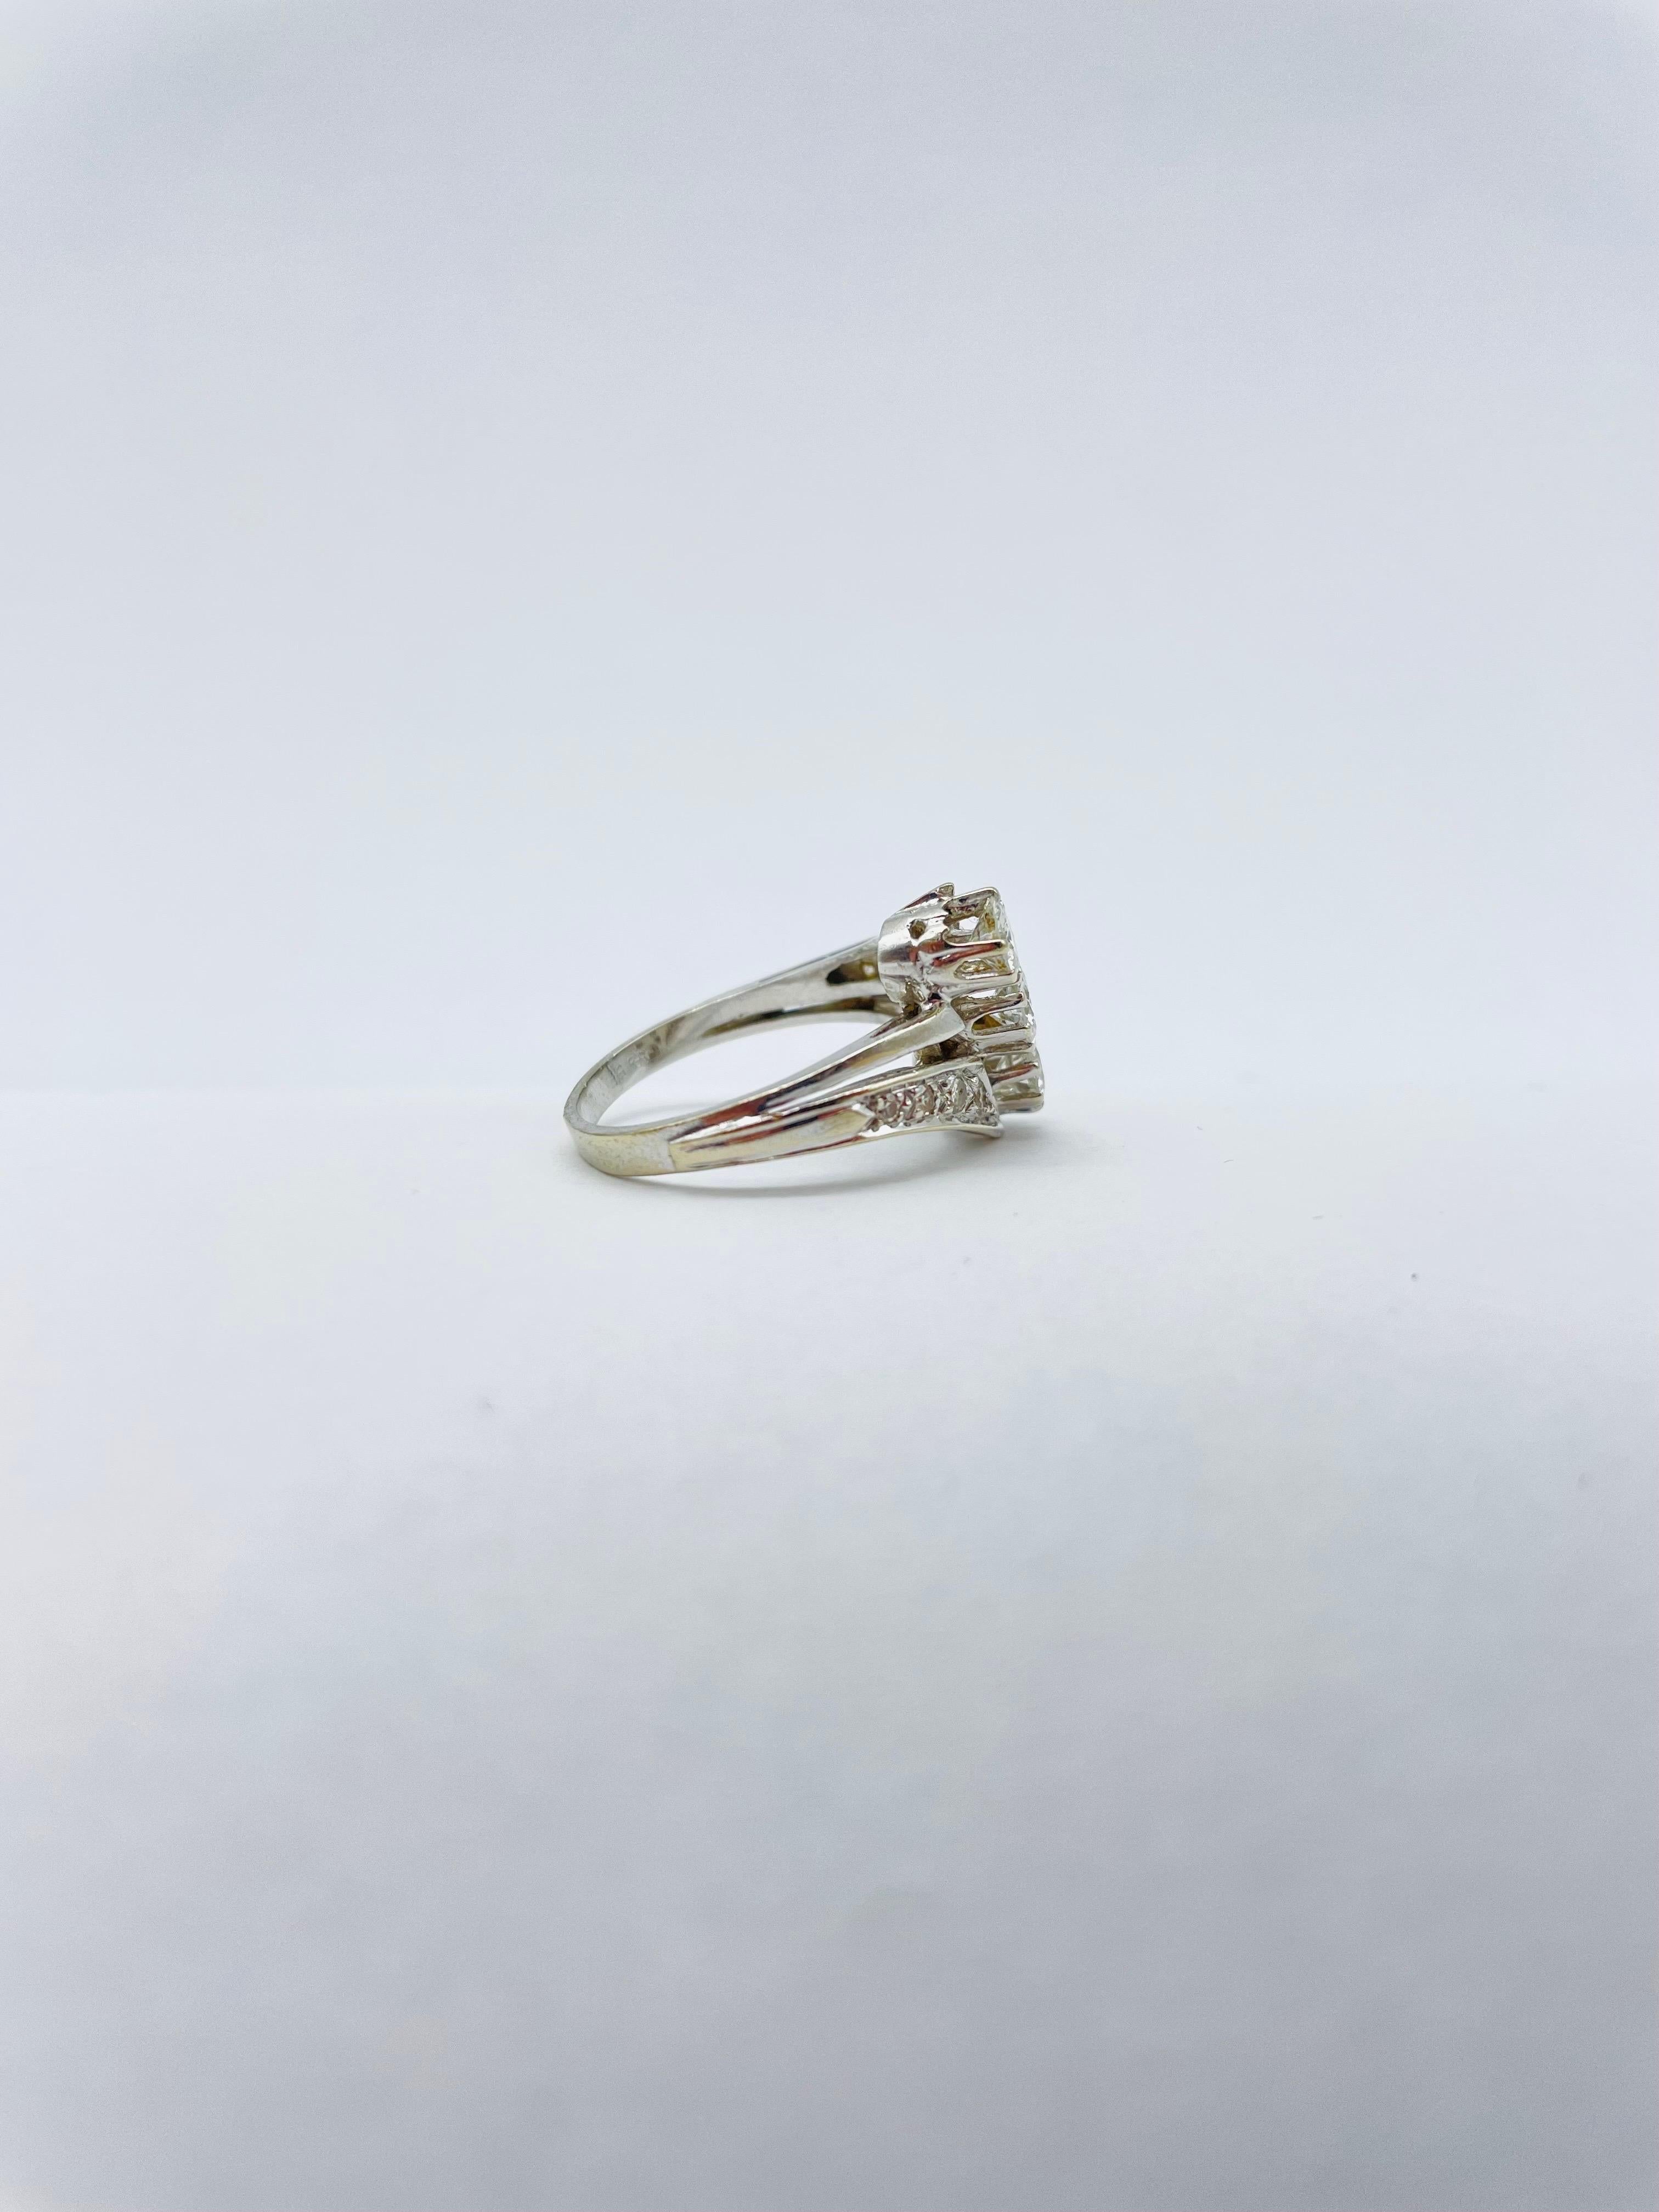 Magnificent 14k White Gold Ring with a Trio of Diamonds Each 0.25 Carat  For Sale 5